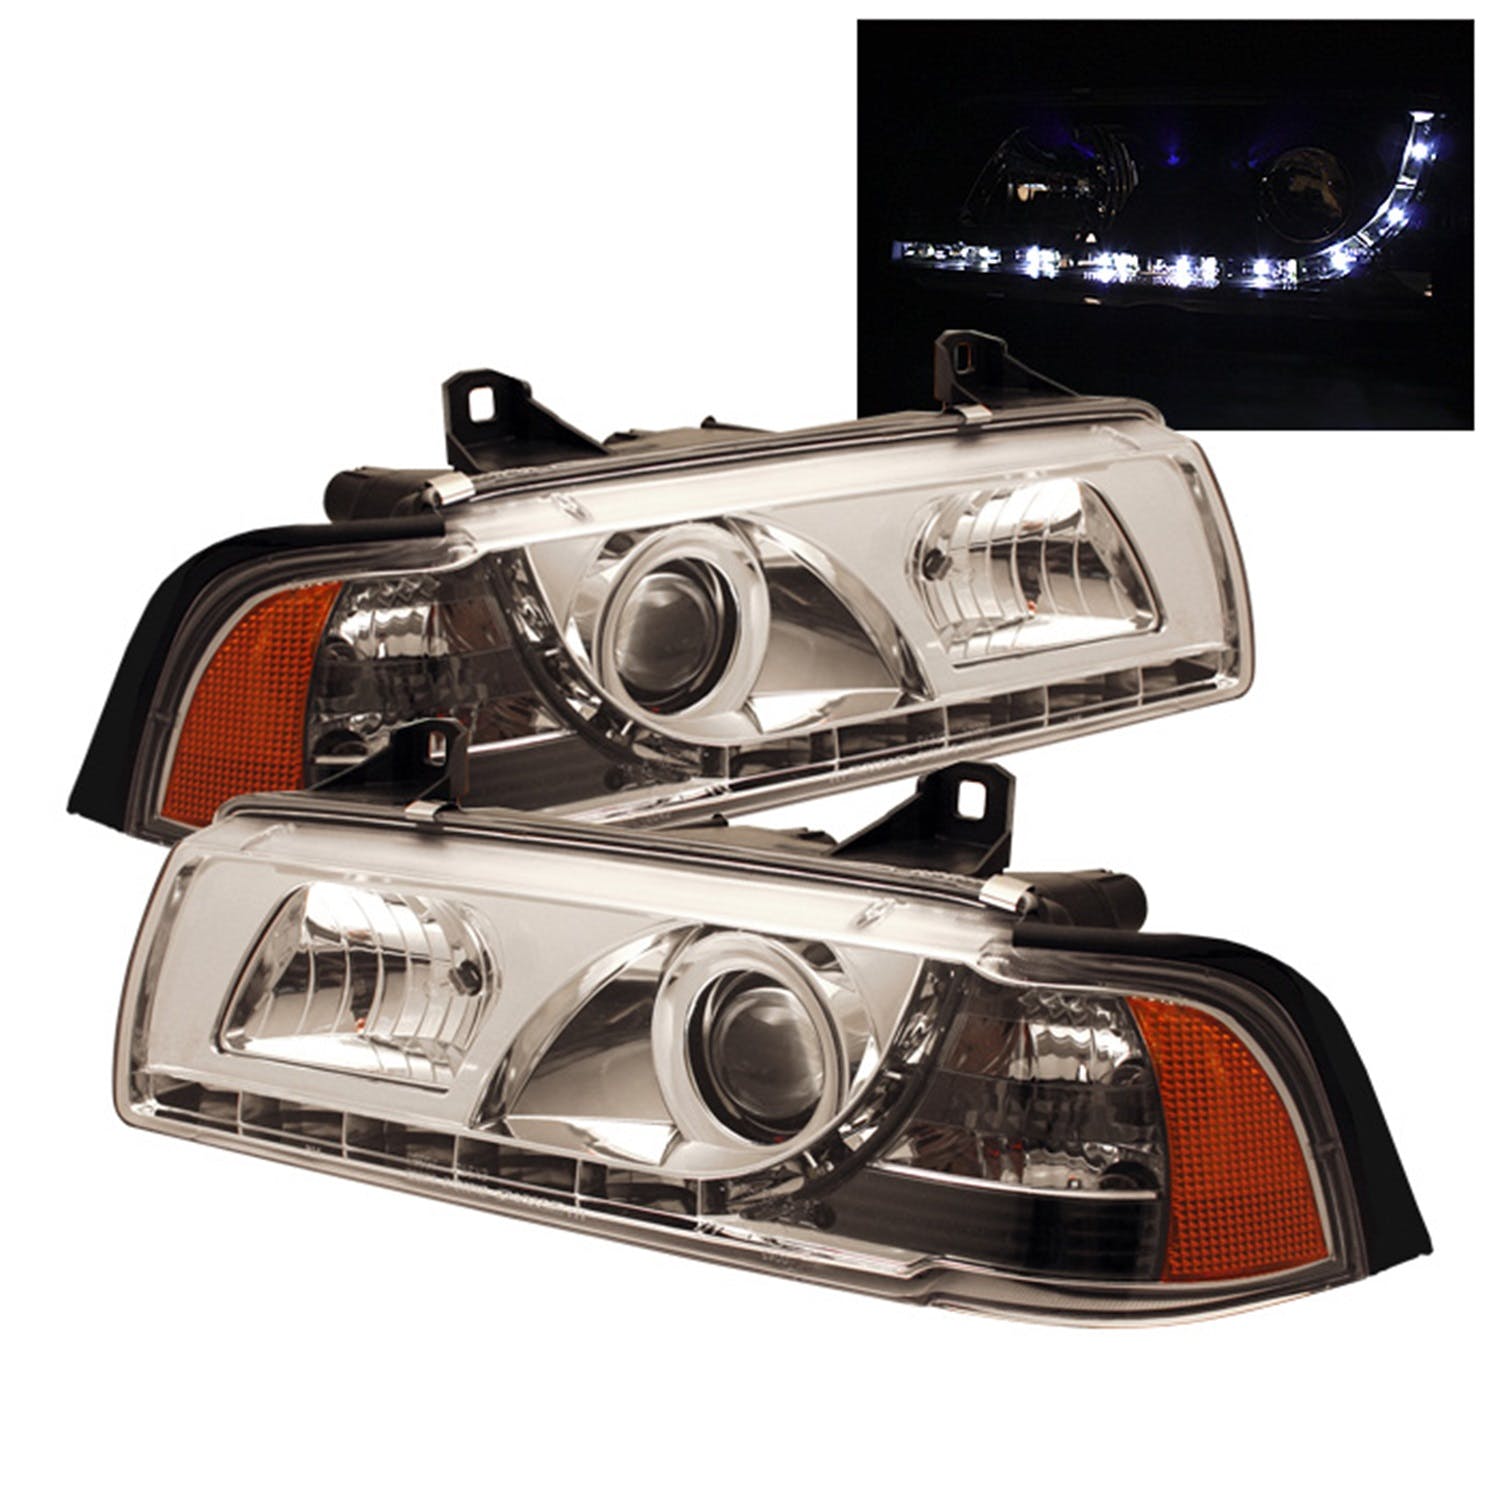 Spyder Auto 5008756 ( SPYDER ) BMW E36 3-SERIES 92-98 2DR PROJECTOR HEADLIGHTS 1PC-NOT FIT TI MODEL-